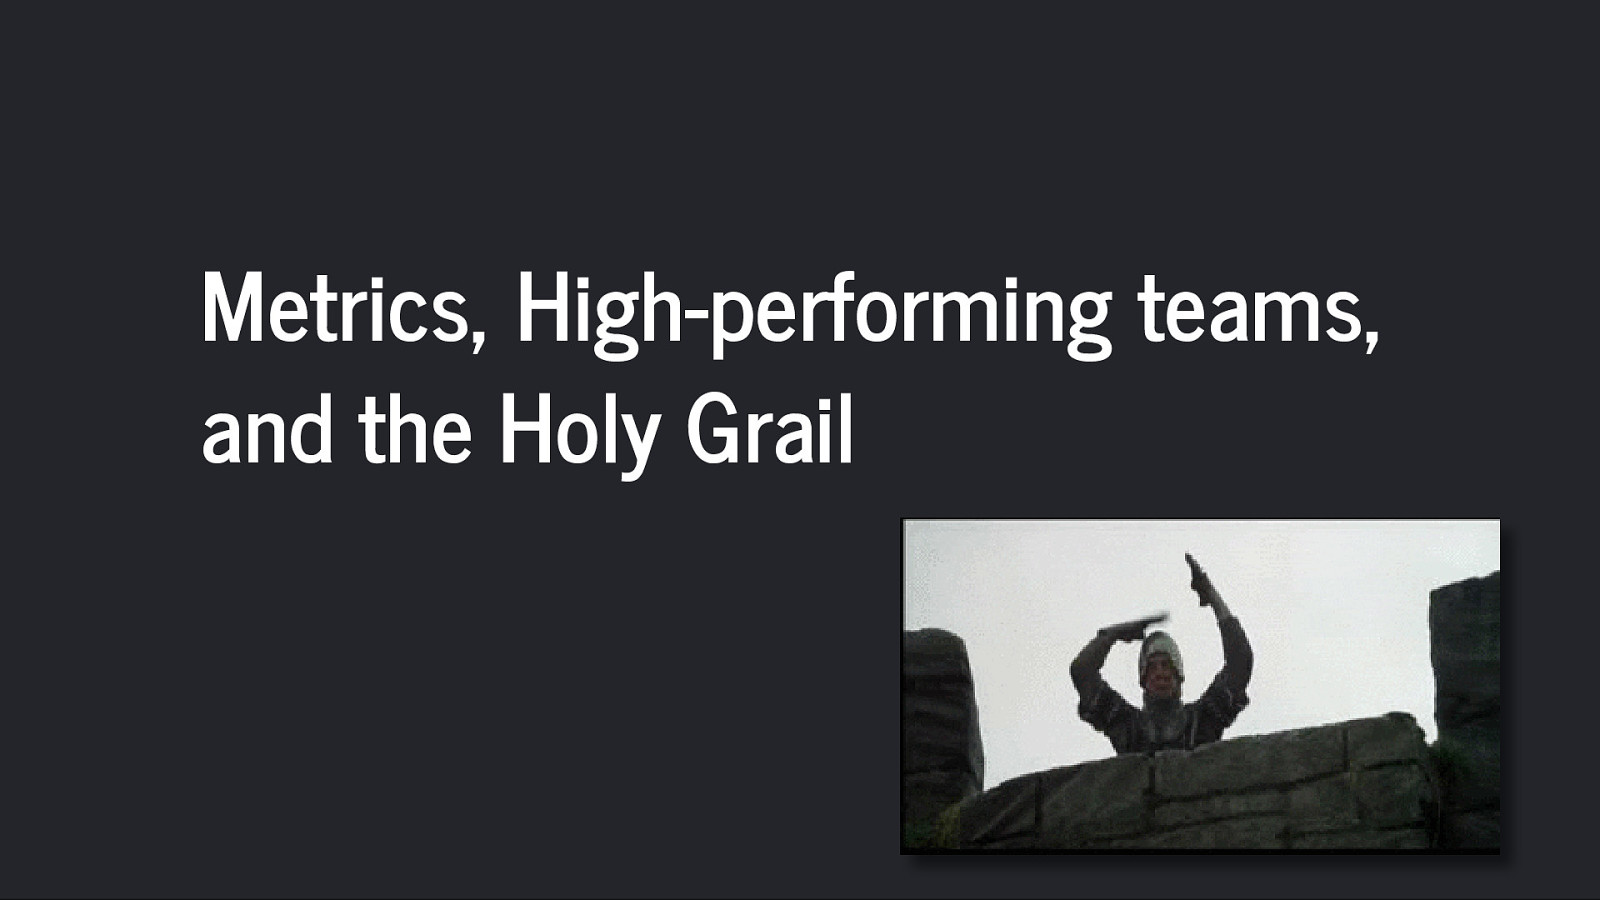 High-performing engineering teams and the Holy Grail